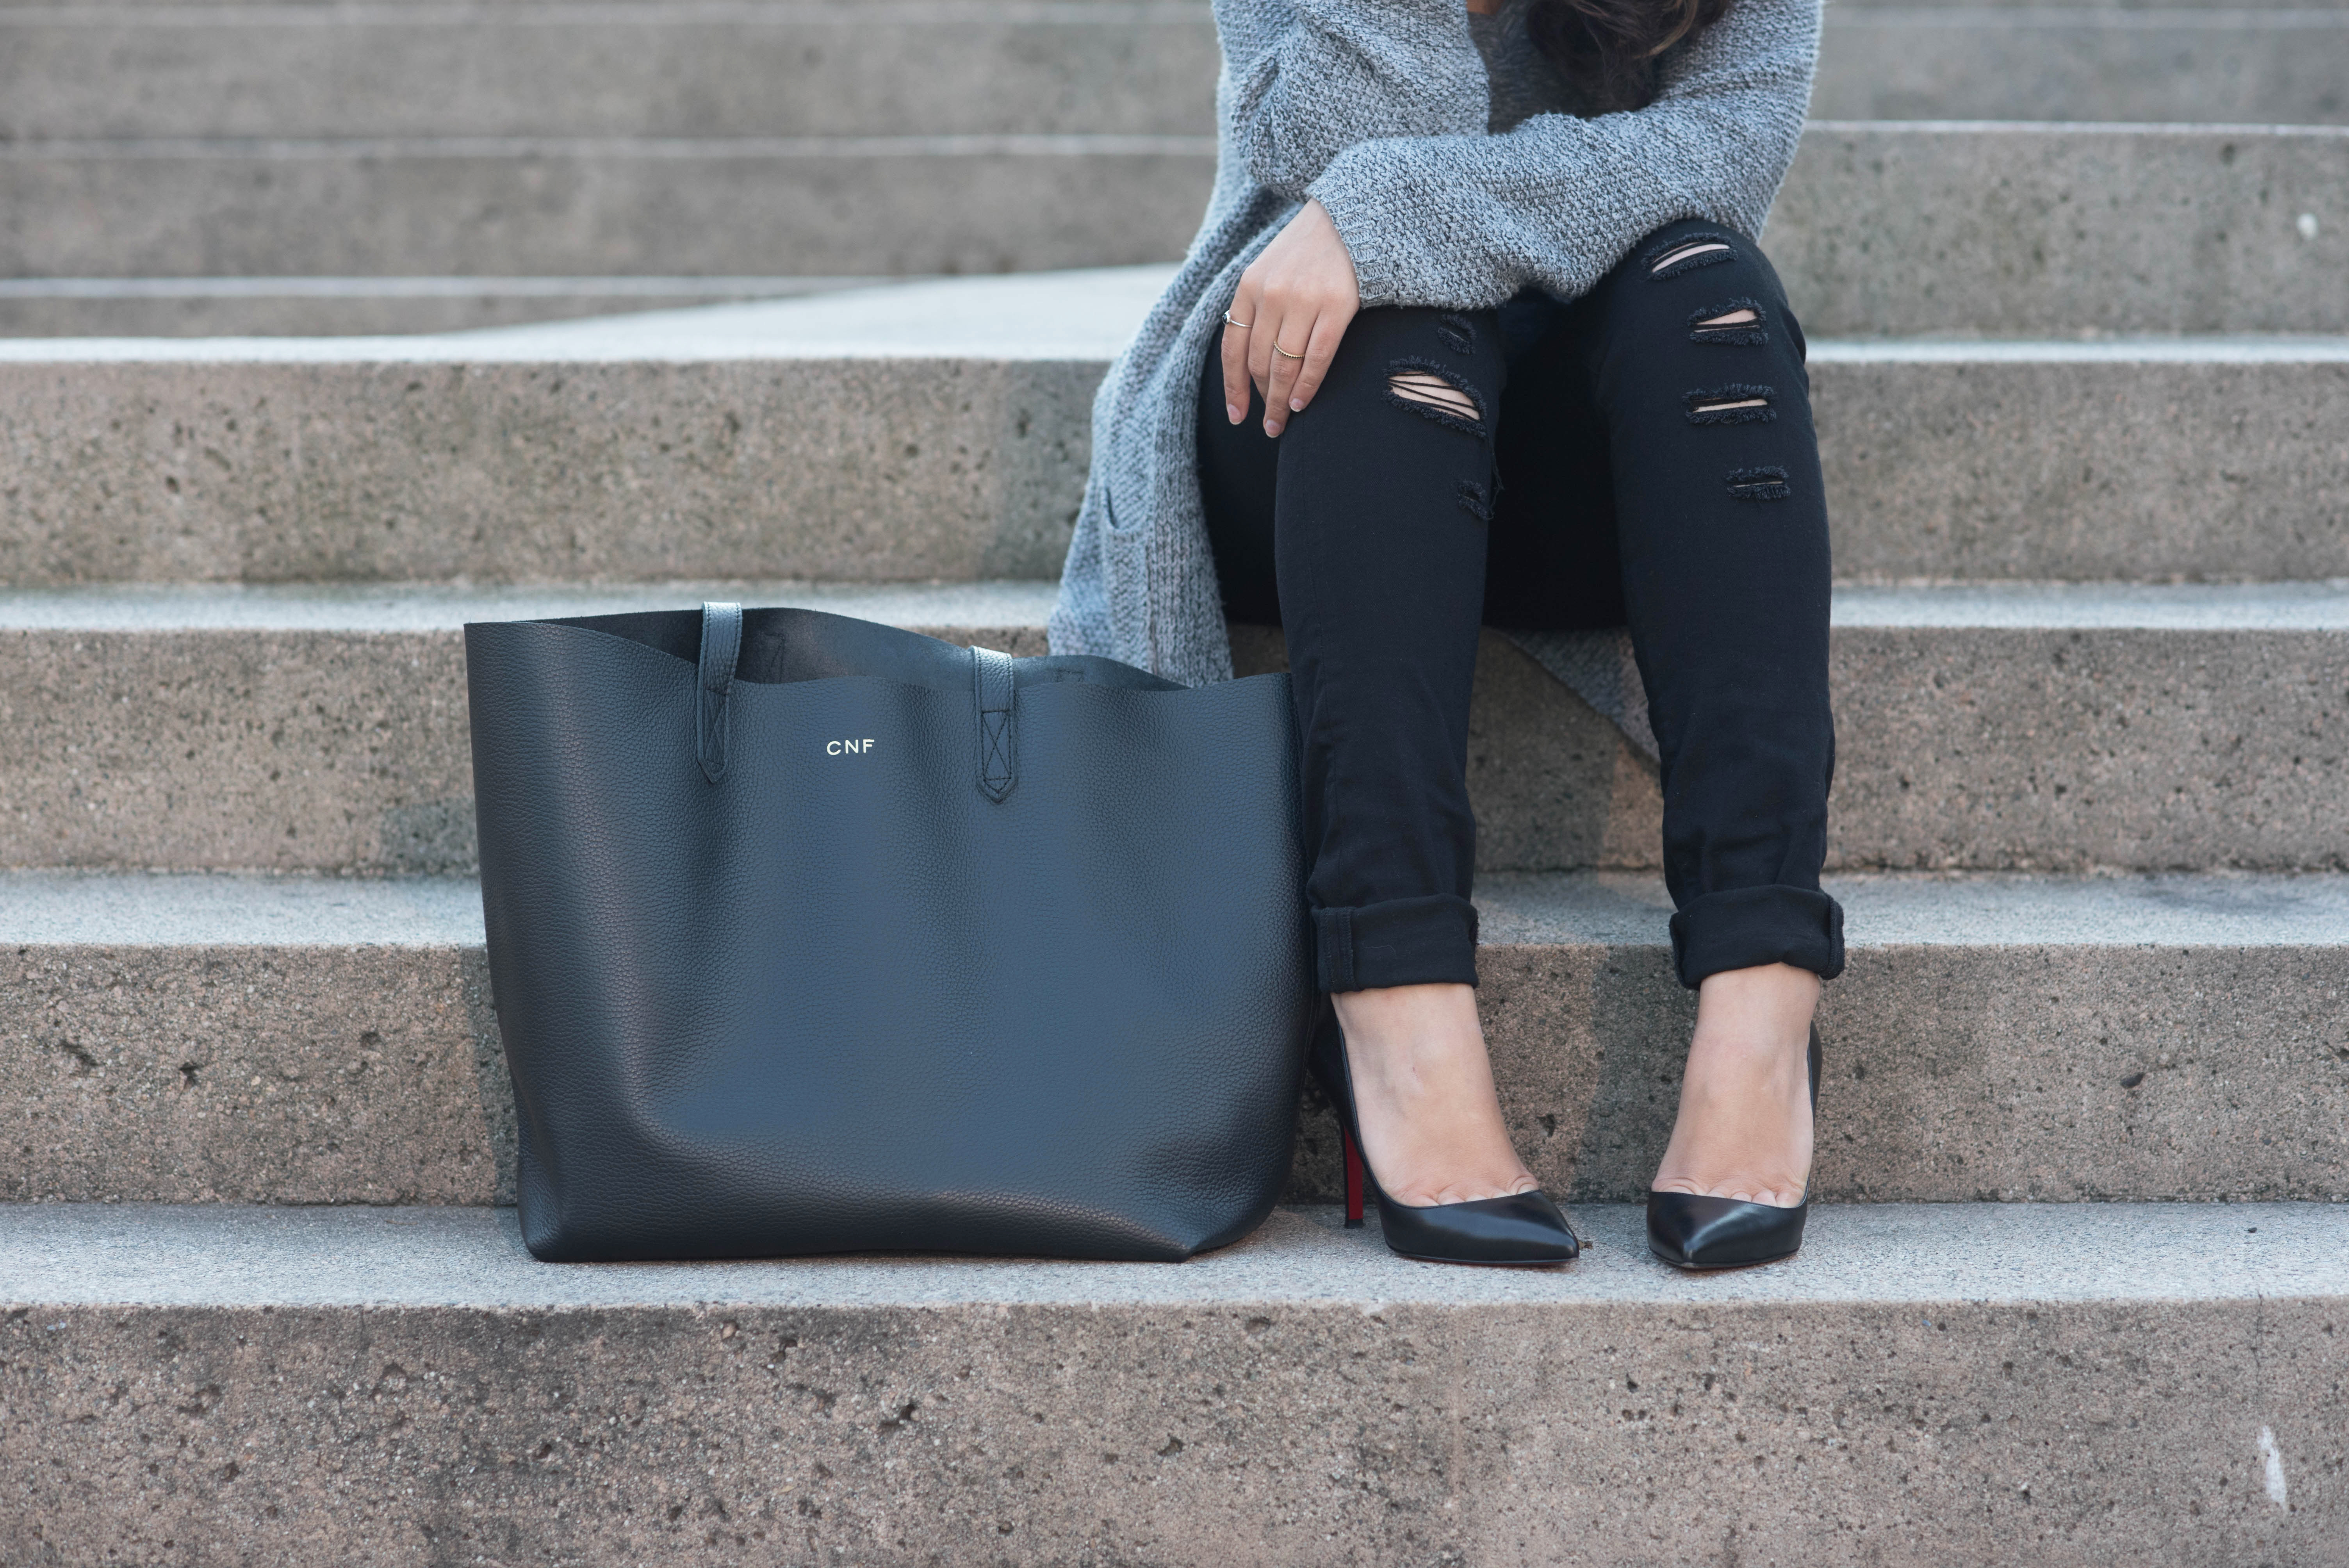 coco-and-vera-best-vancouver-style-blog-best-canadian-style-blog-top-blogger-outfit-details-cuyana-monogram-tote-christian-louboutin-pigalle-pumps-mavi-adriana-jeans